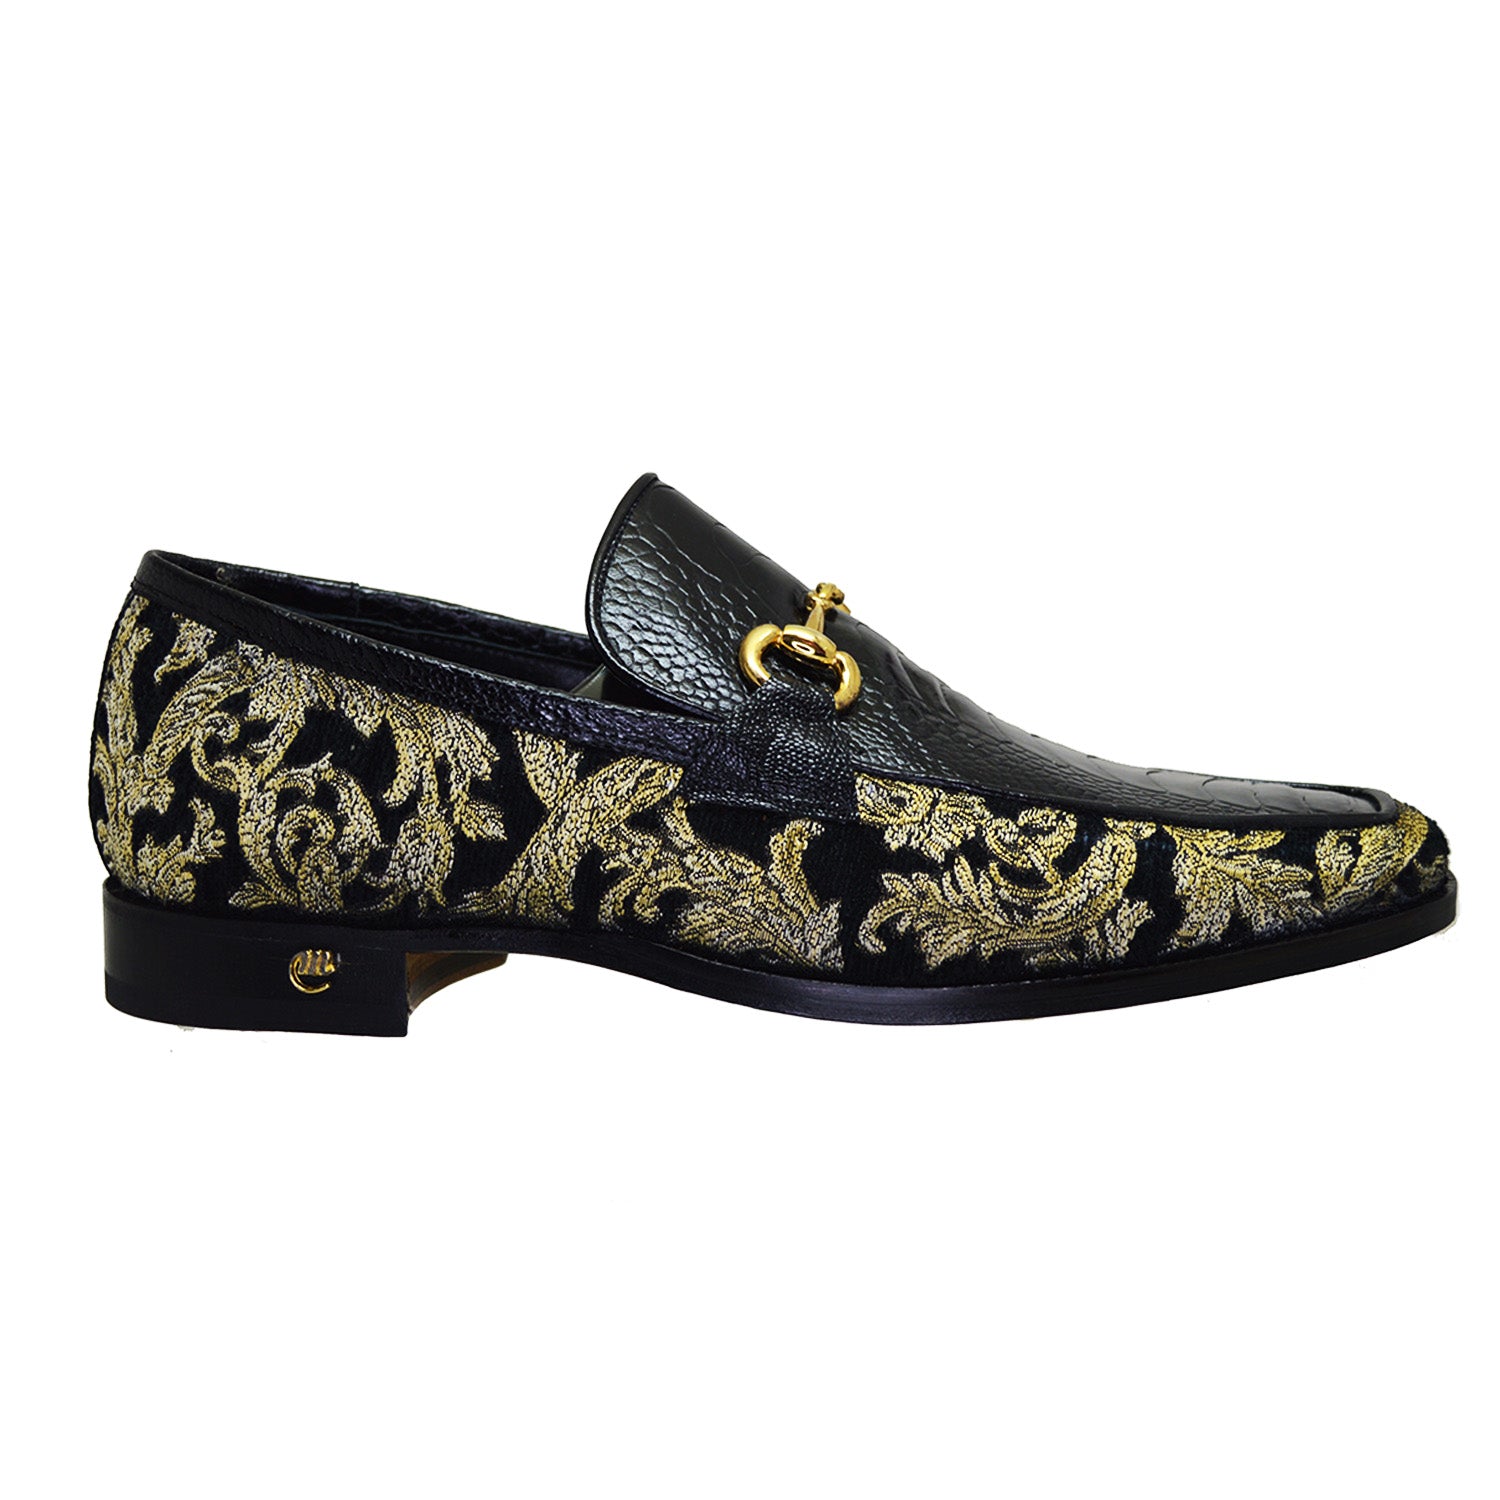 Mauri 4938 Ostrich Leg / Didier Fabric Loafer Black / Gold (Special Order)